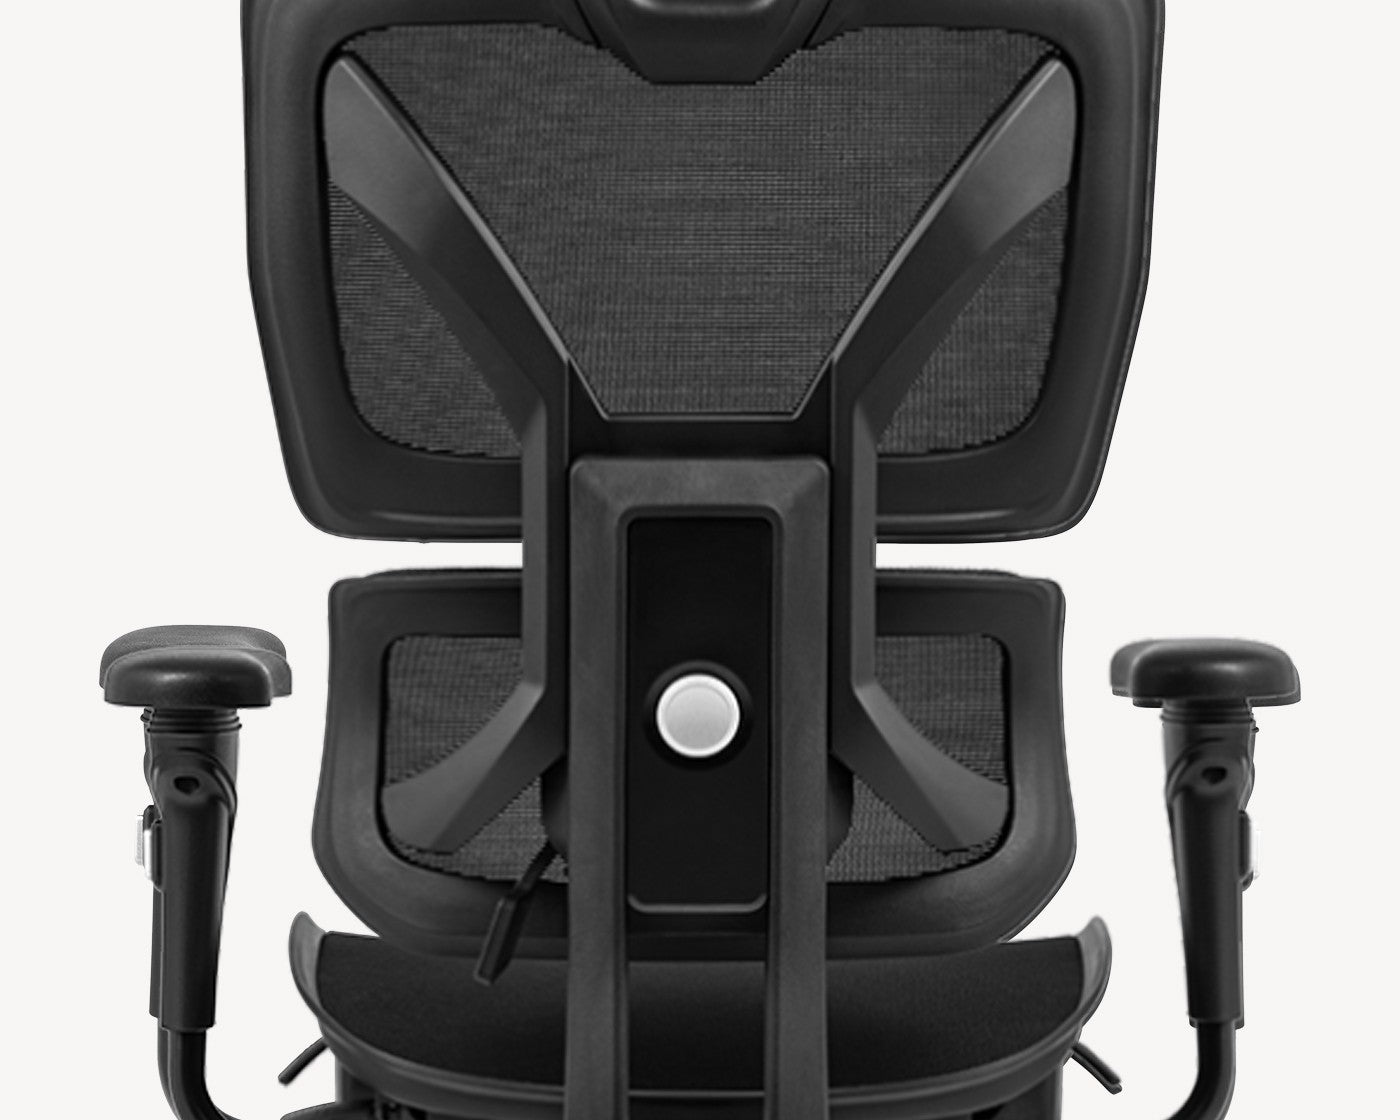 Flujo ergonomic office chair highlighting the Glide System for smooth recline and adjustability.